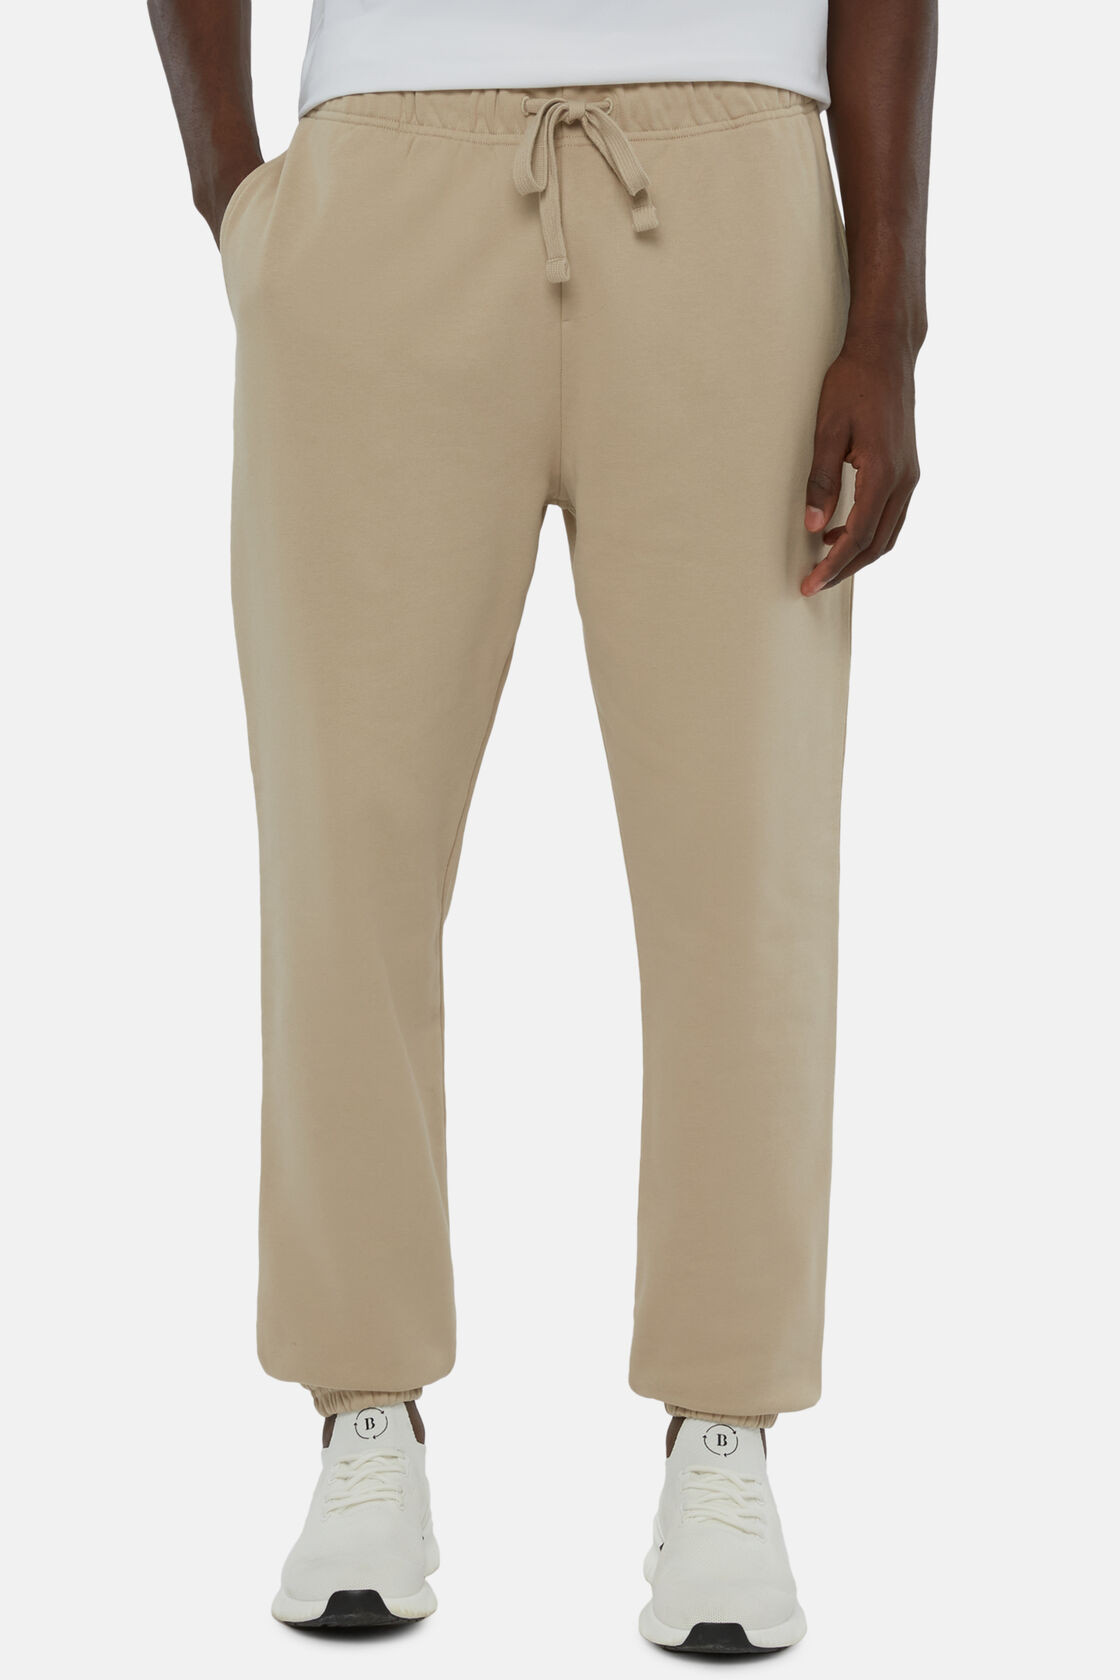 Stretch Mixed Cotton Trousers, Beige, hi-res